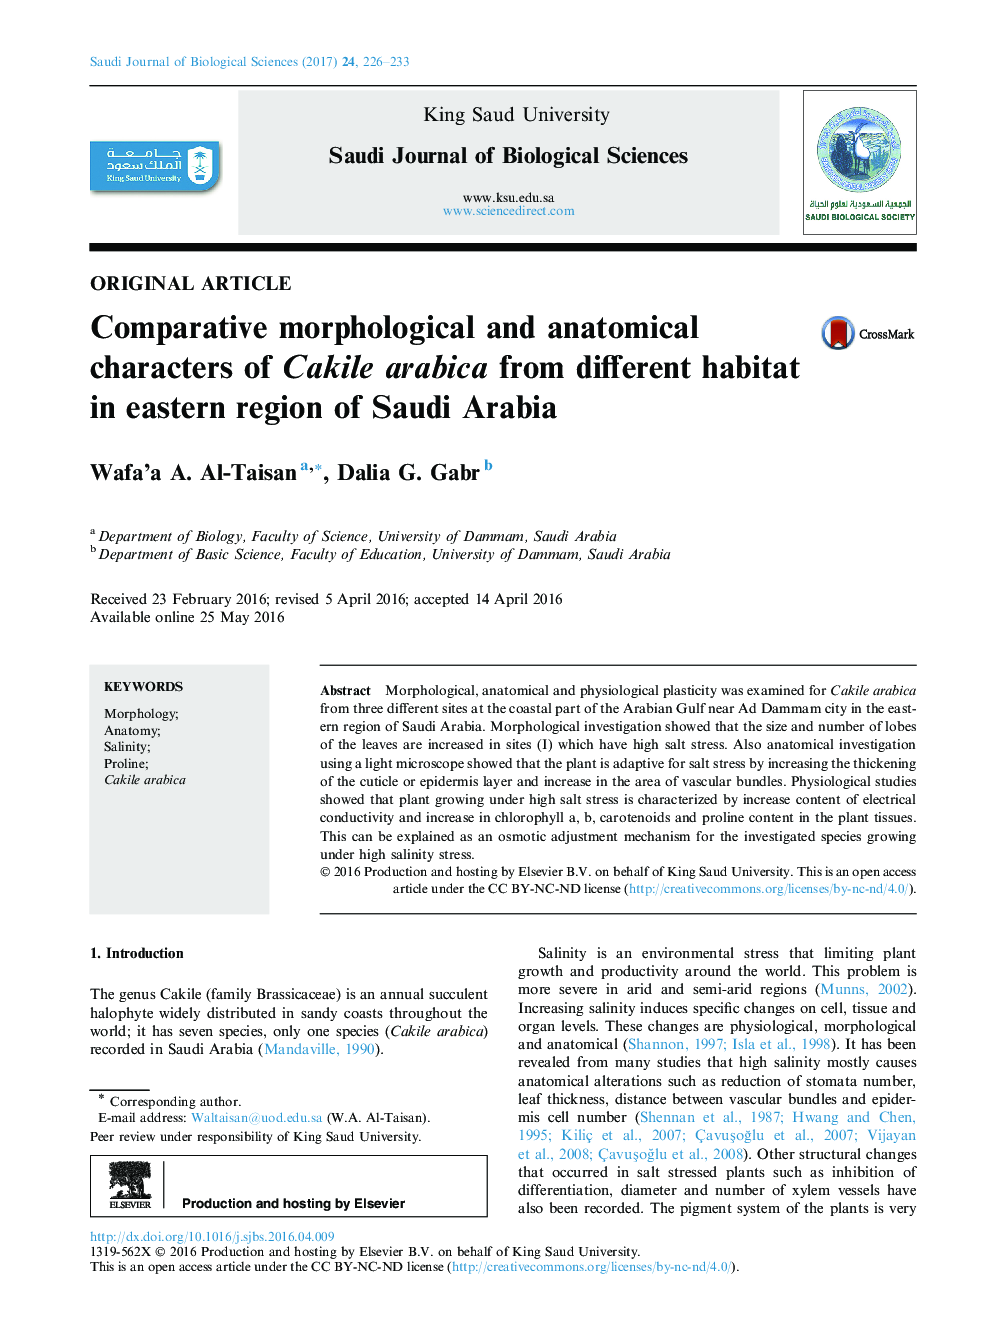 Original articleComparative morphological and anatomical characters of Cakile arabica from different habitat in eastern region of Saudi Arabia